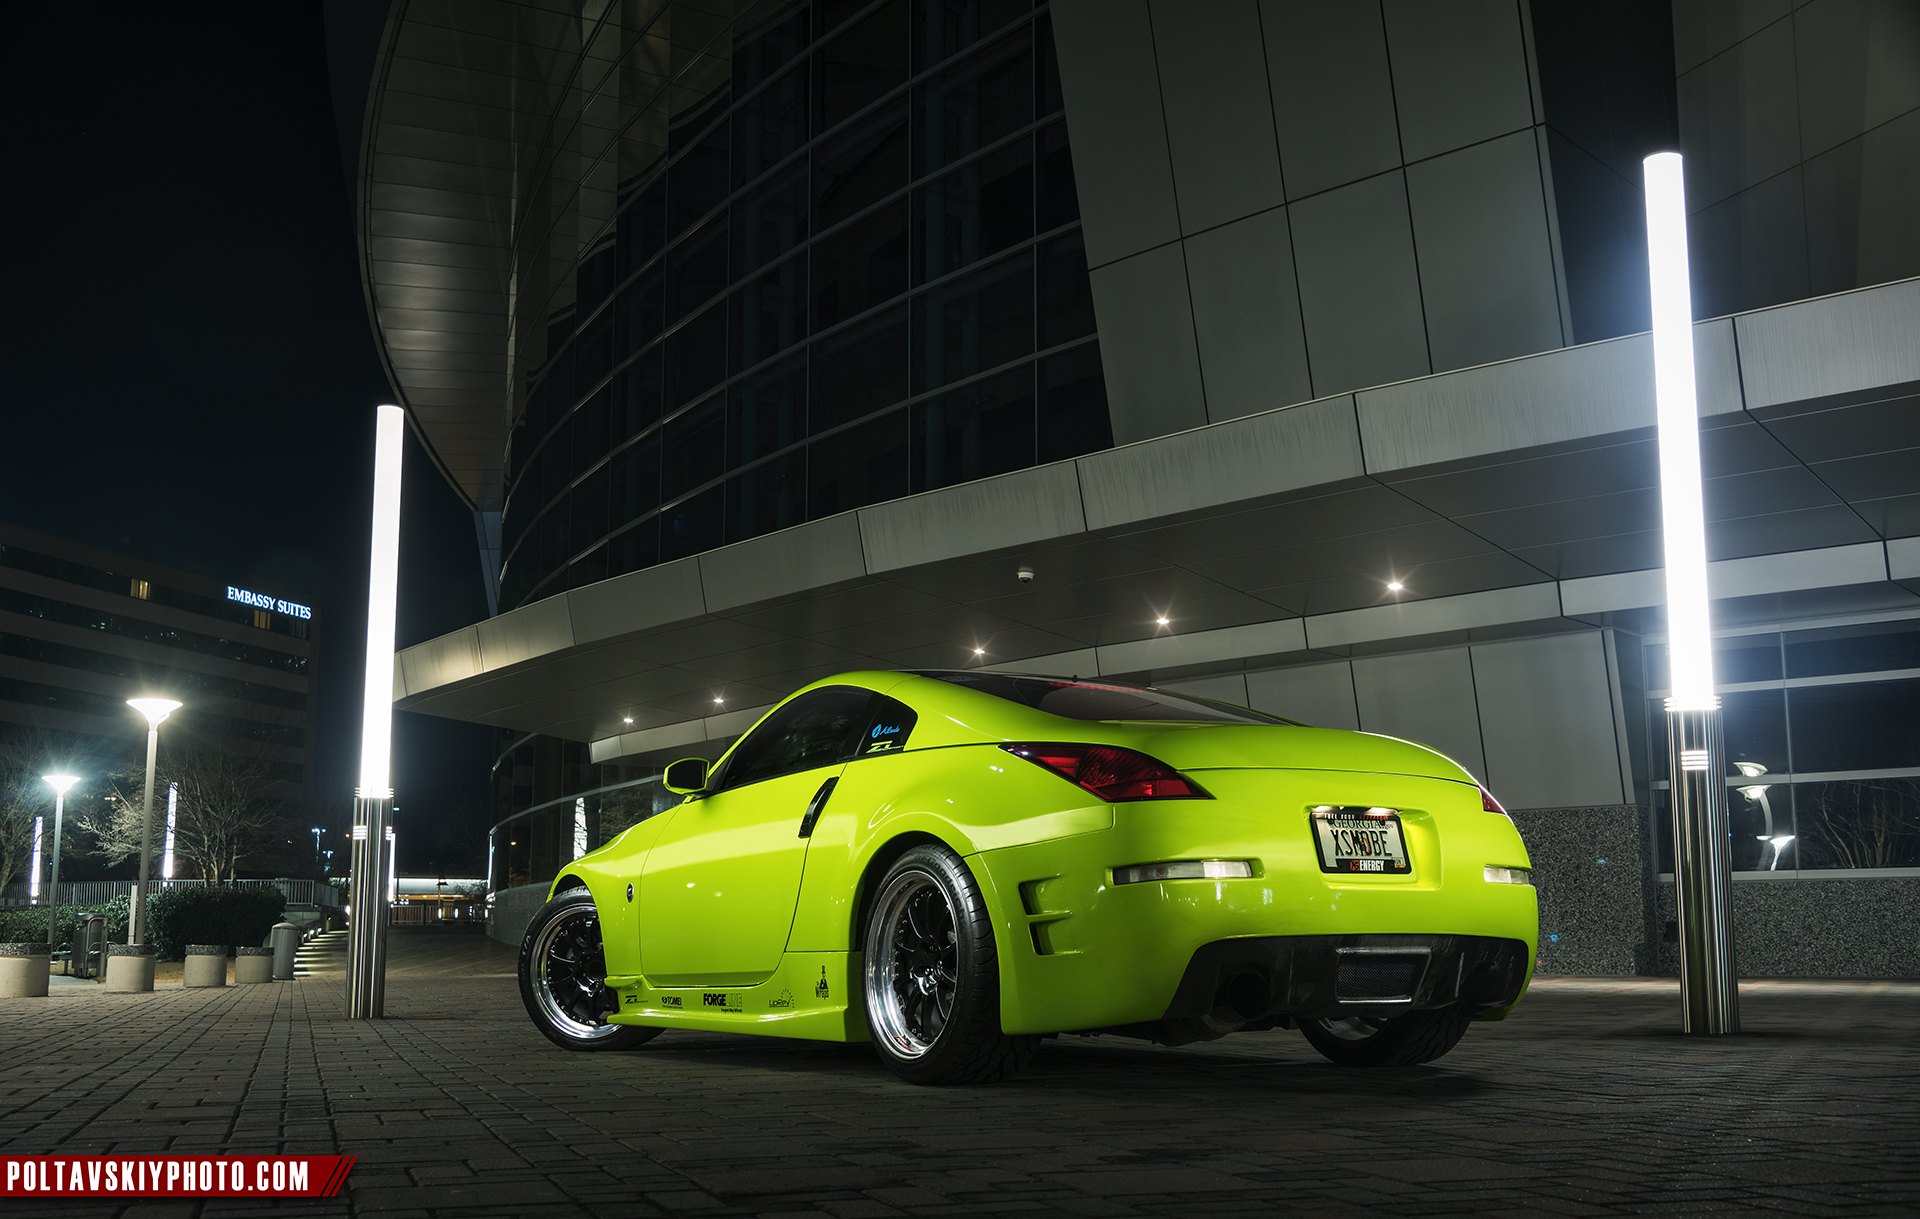 Lime Green Nissan 350Z with Carbon Fiber Rear Diffuser - Photo by Forgeline Motorsports